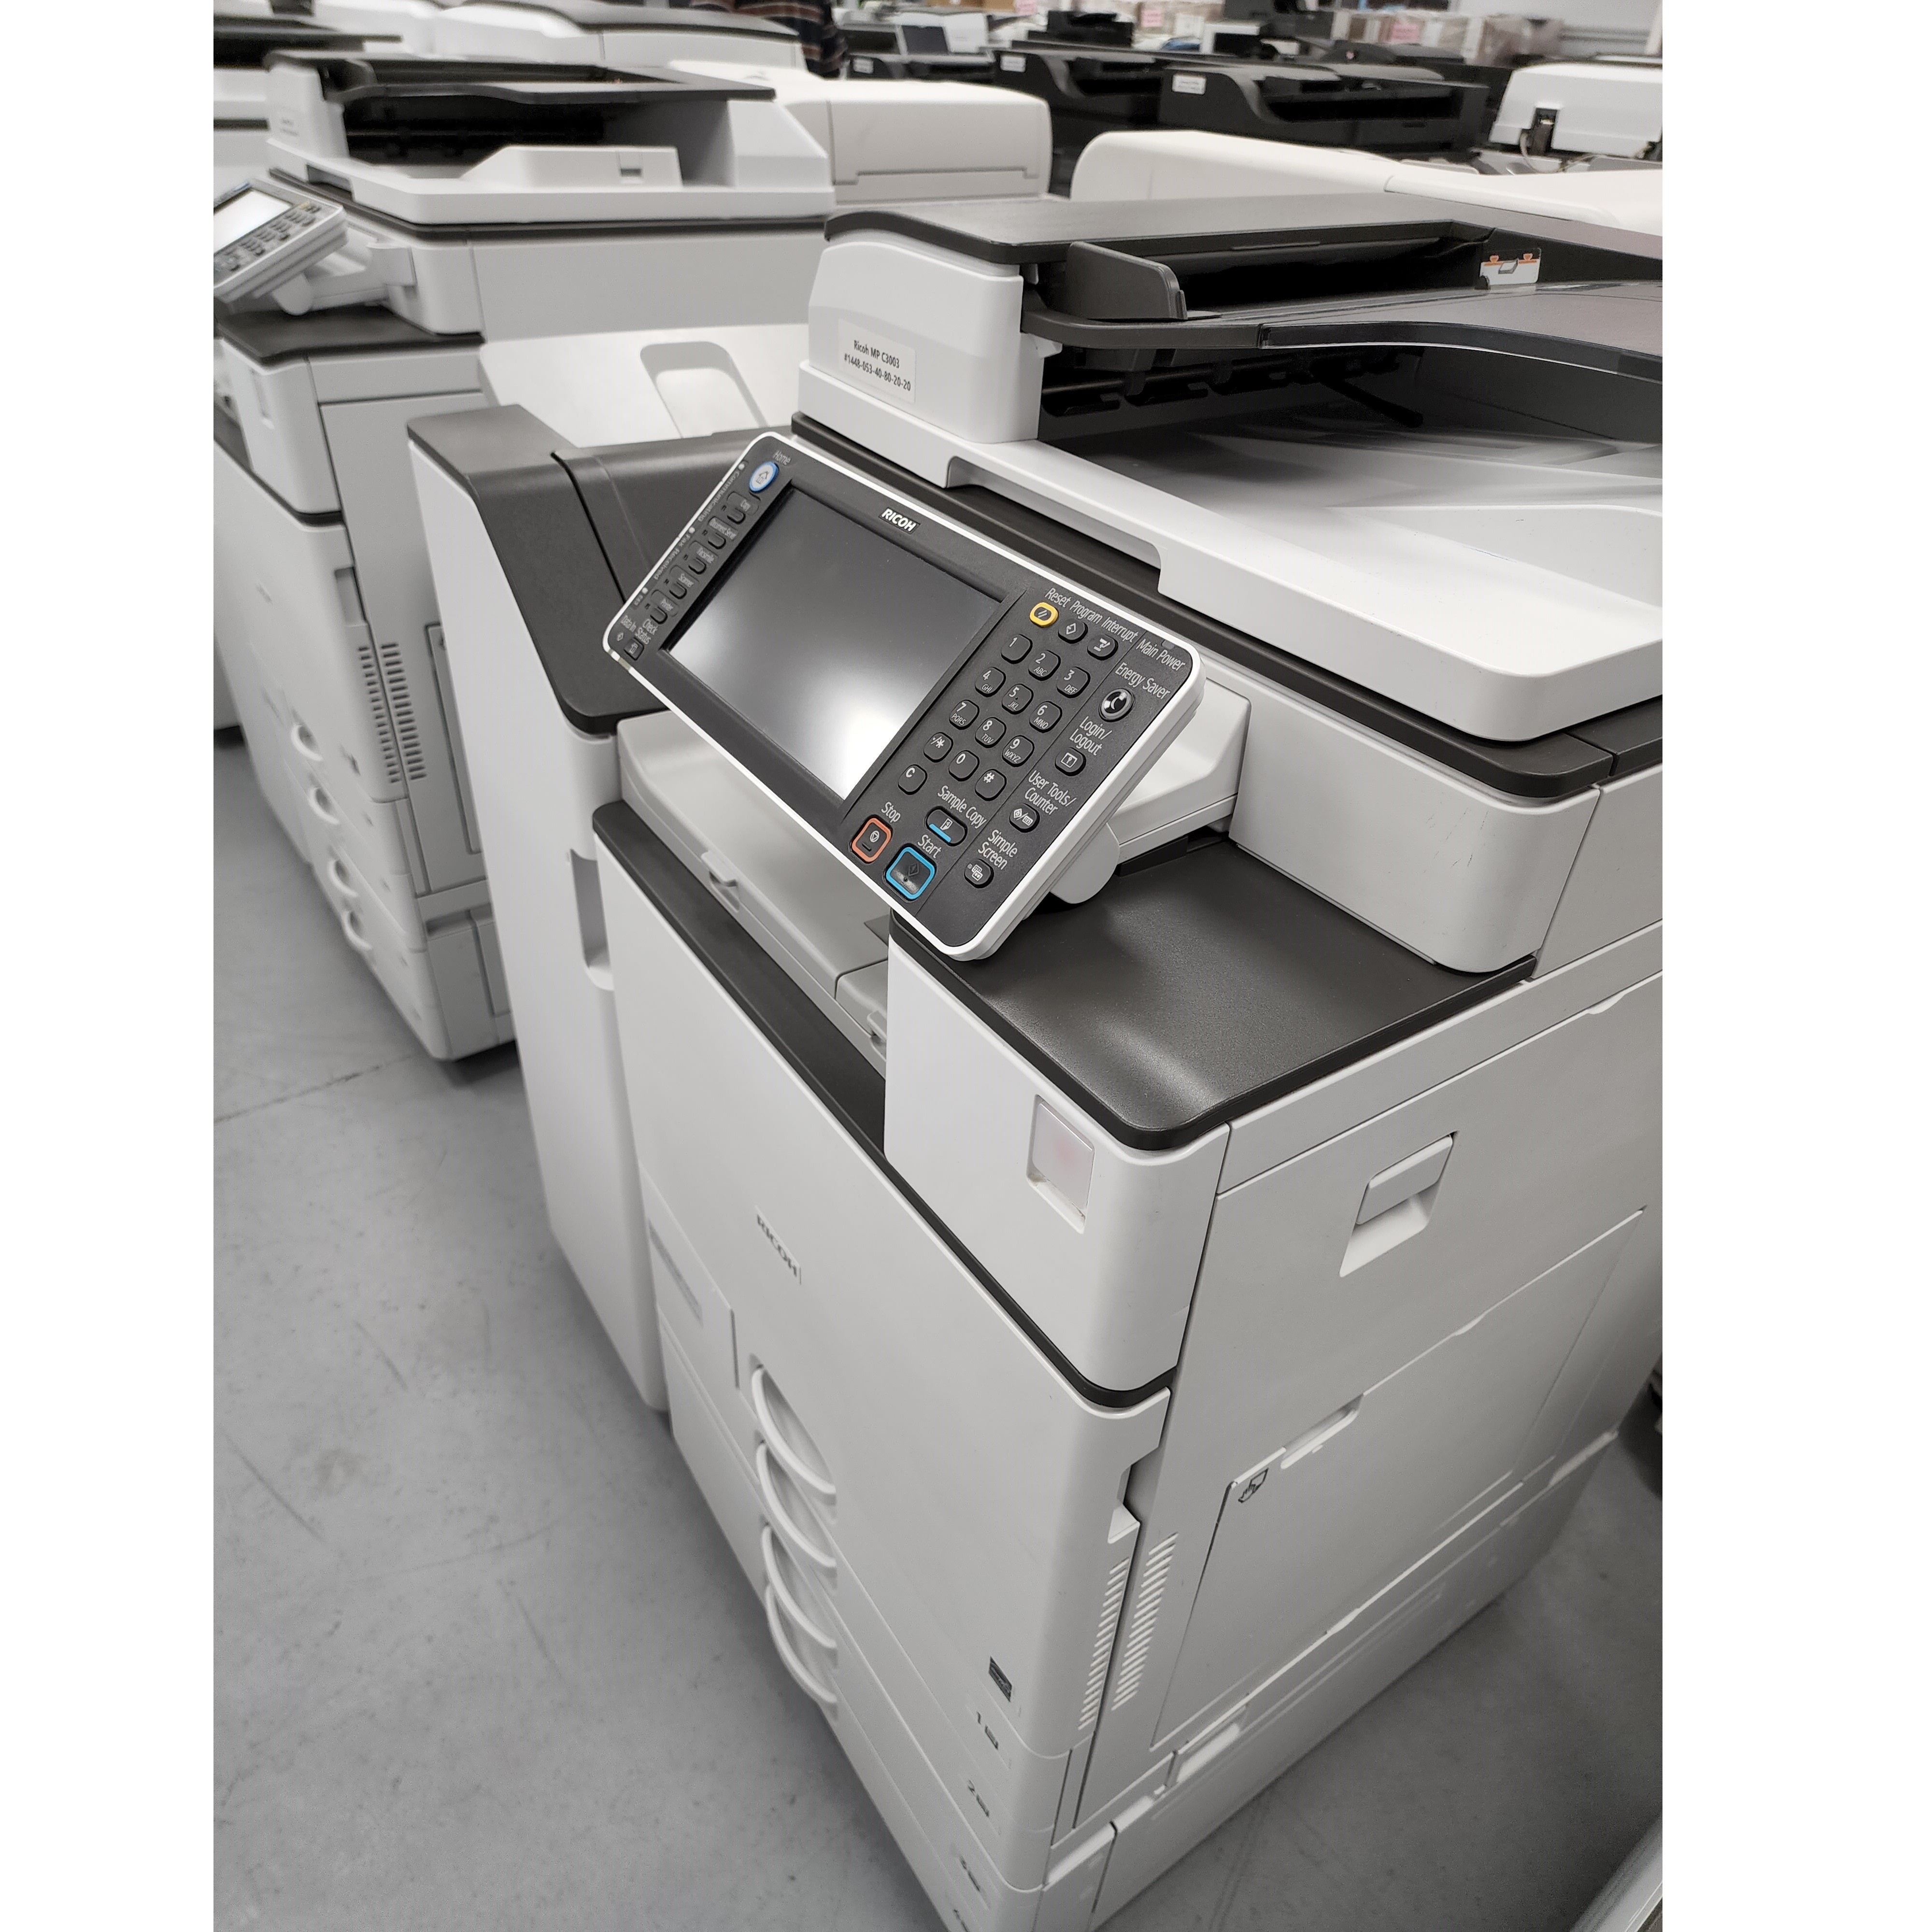 $72/Month Ricoh MP C3003 A3 Color Laser Multifunction Photocopier Machine With Finisher Stapler Copier Color Printer For Sale - Easy To Use Color Printer And Better for Your Business